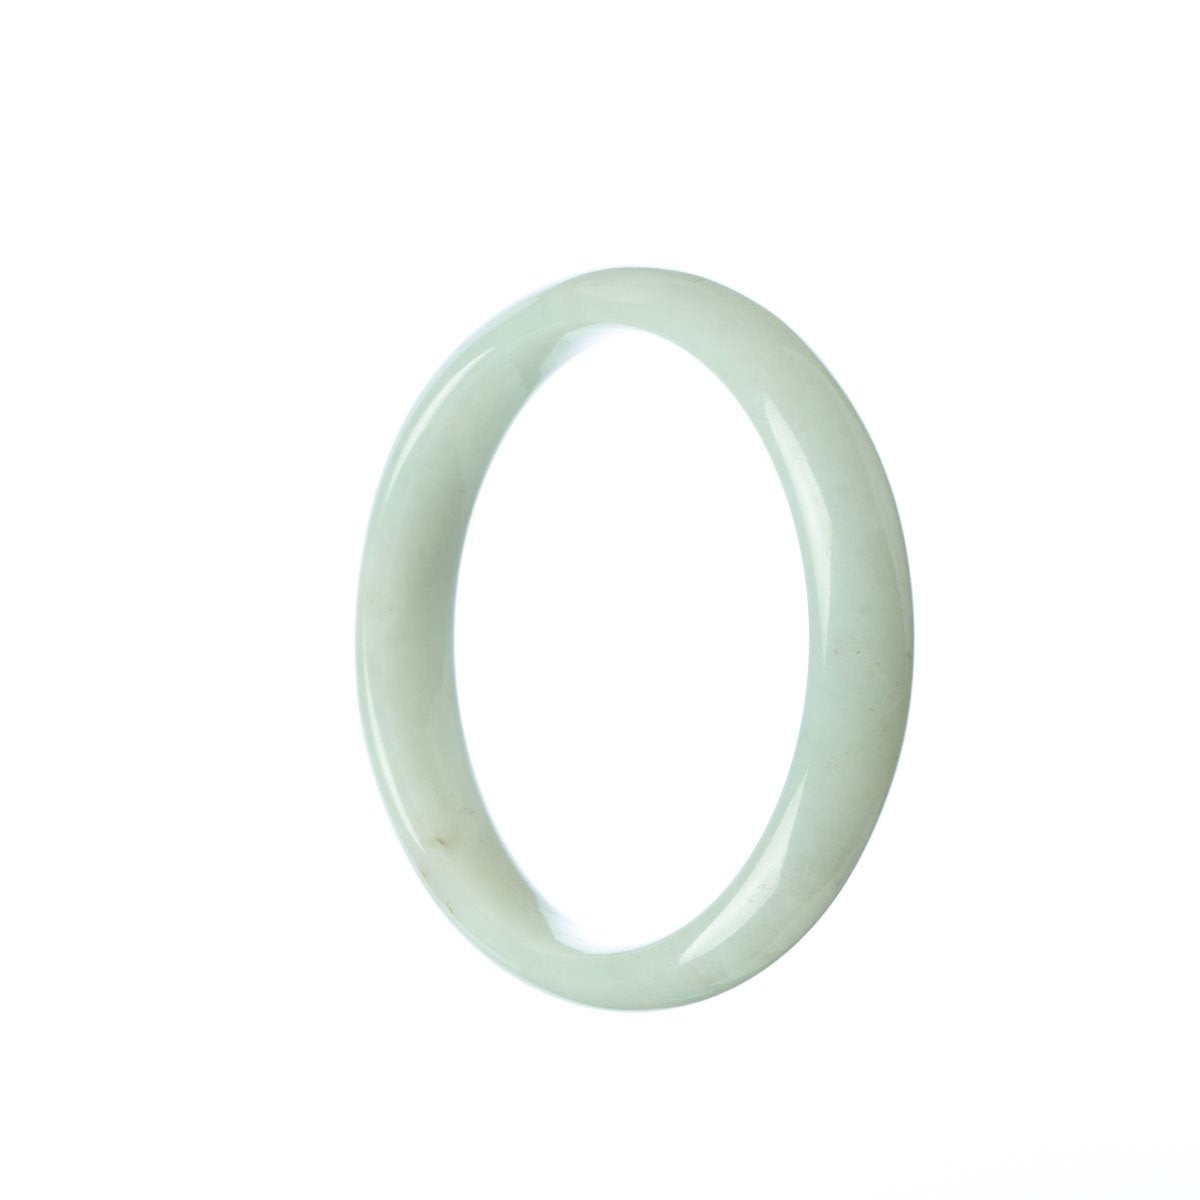 A pale green jade bracelet in a half moon shape, crafted from genuine natural jade.